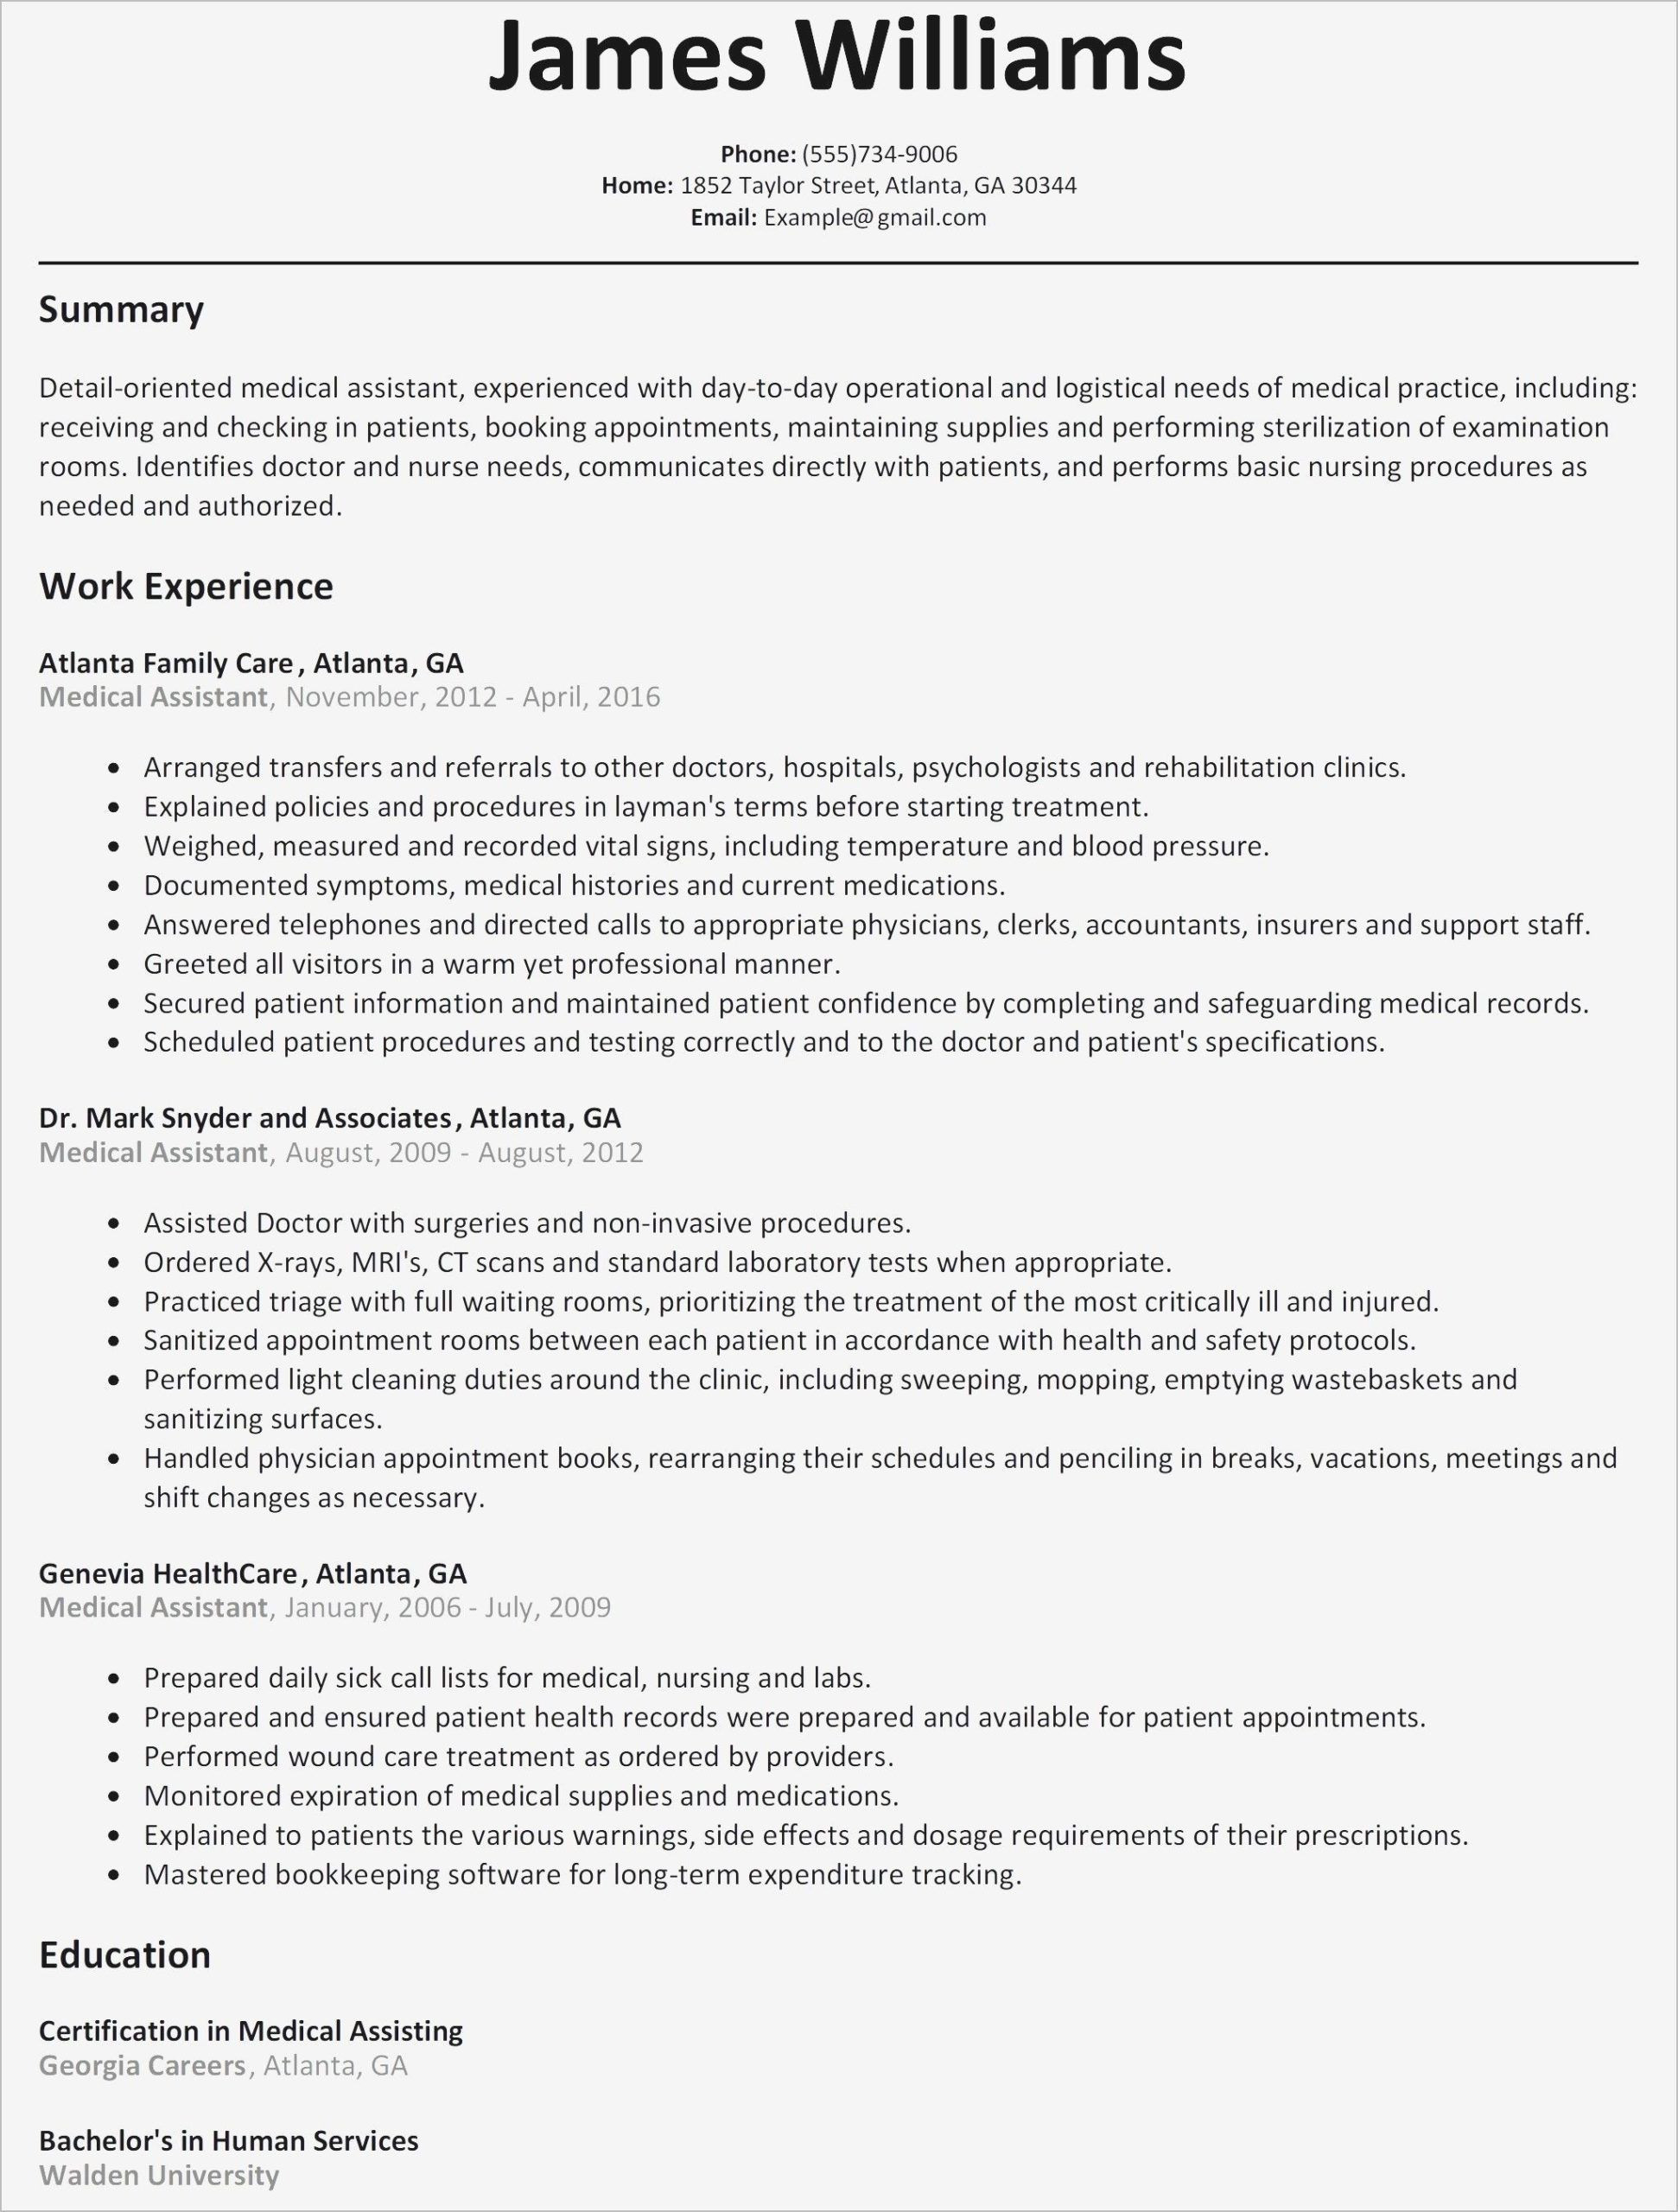 Cover Letter Template My Perfect Resume Cover Letter Template My Perfect Resume – Resume format Student …